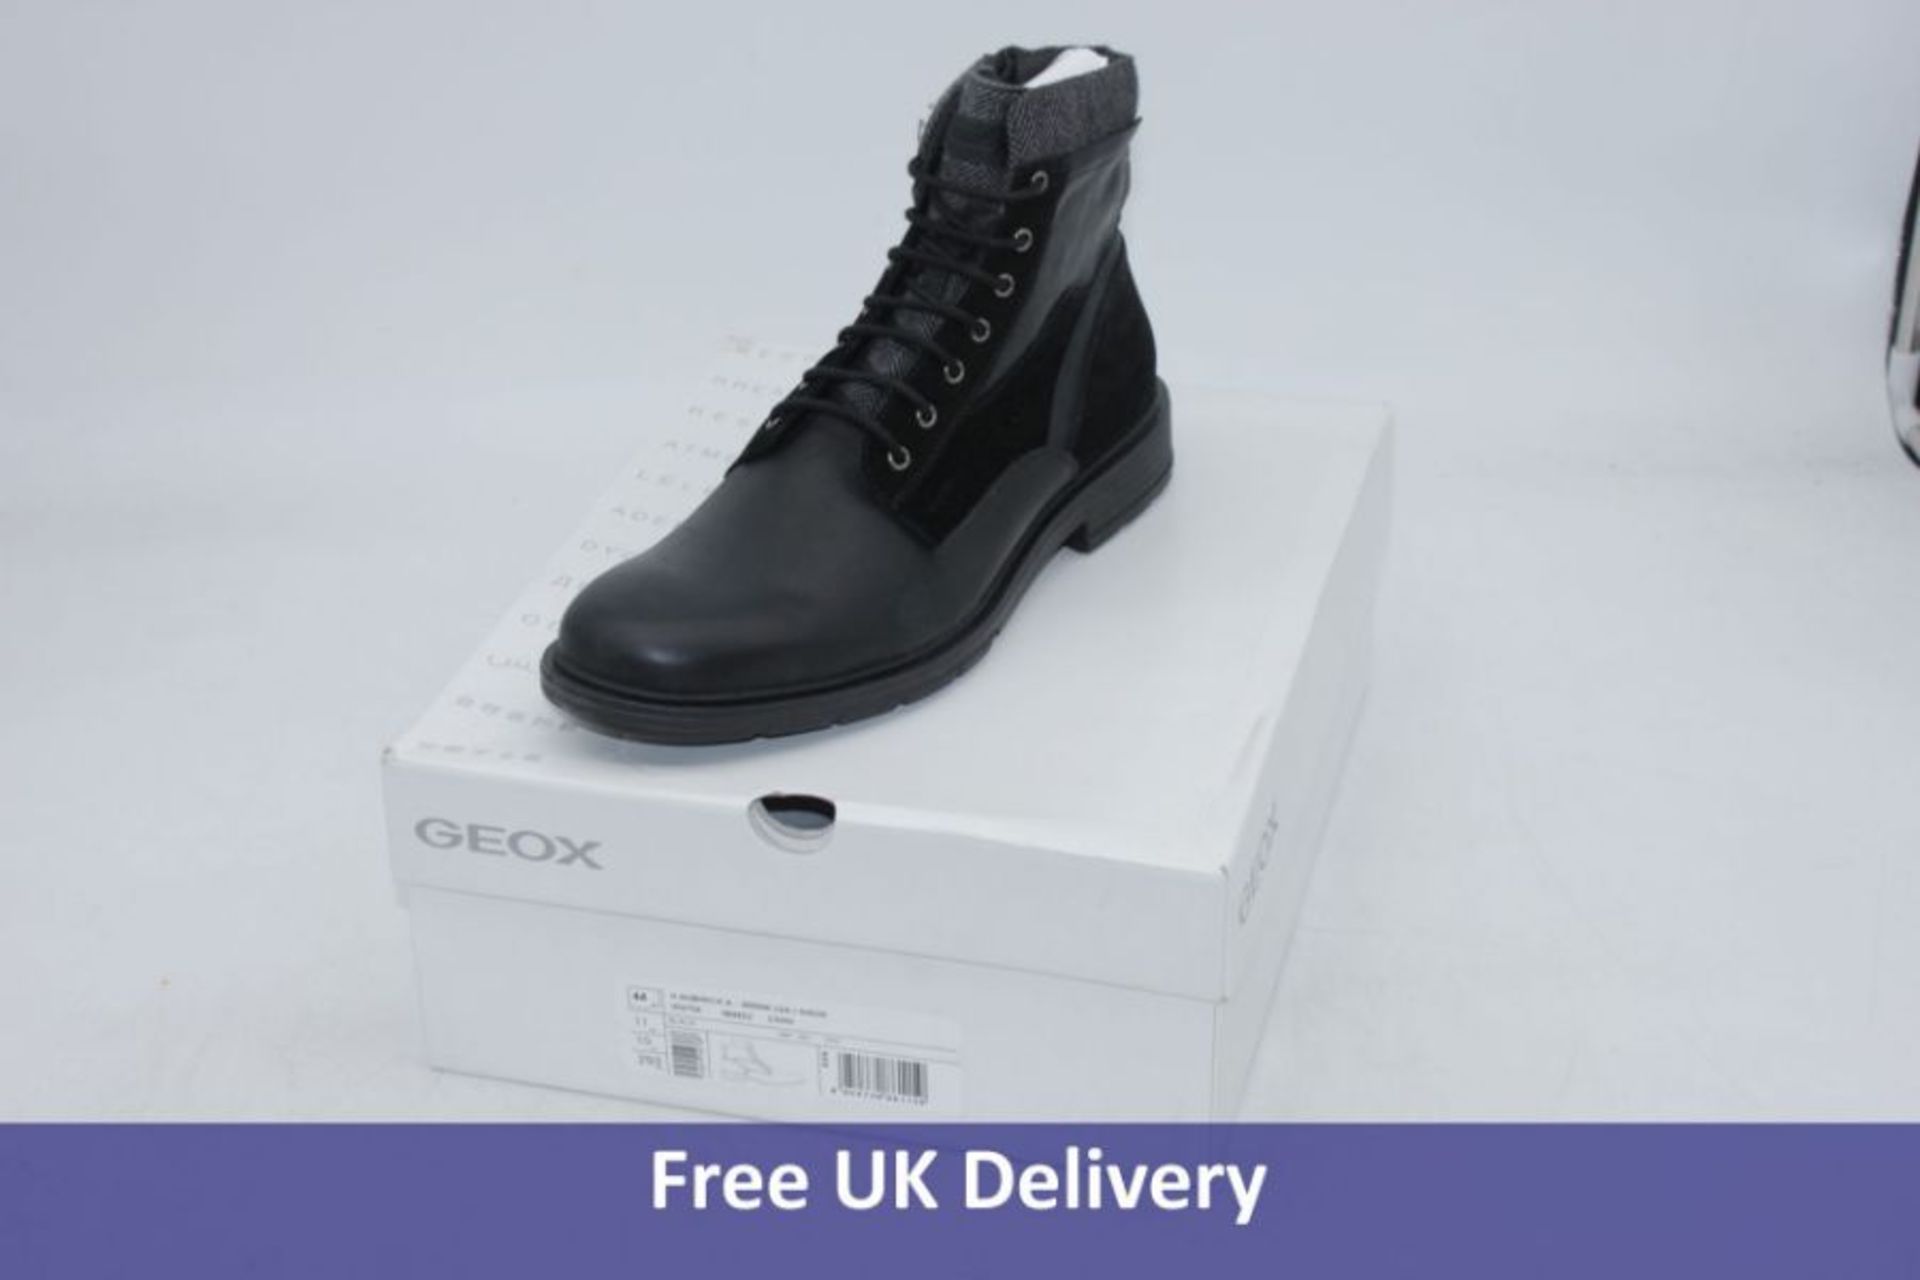 Two pairs of Geox Men's Footwear to include 1x Alberick Lace Up Boot, Black, UK 10 and 1x Moner Sued